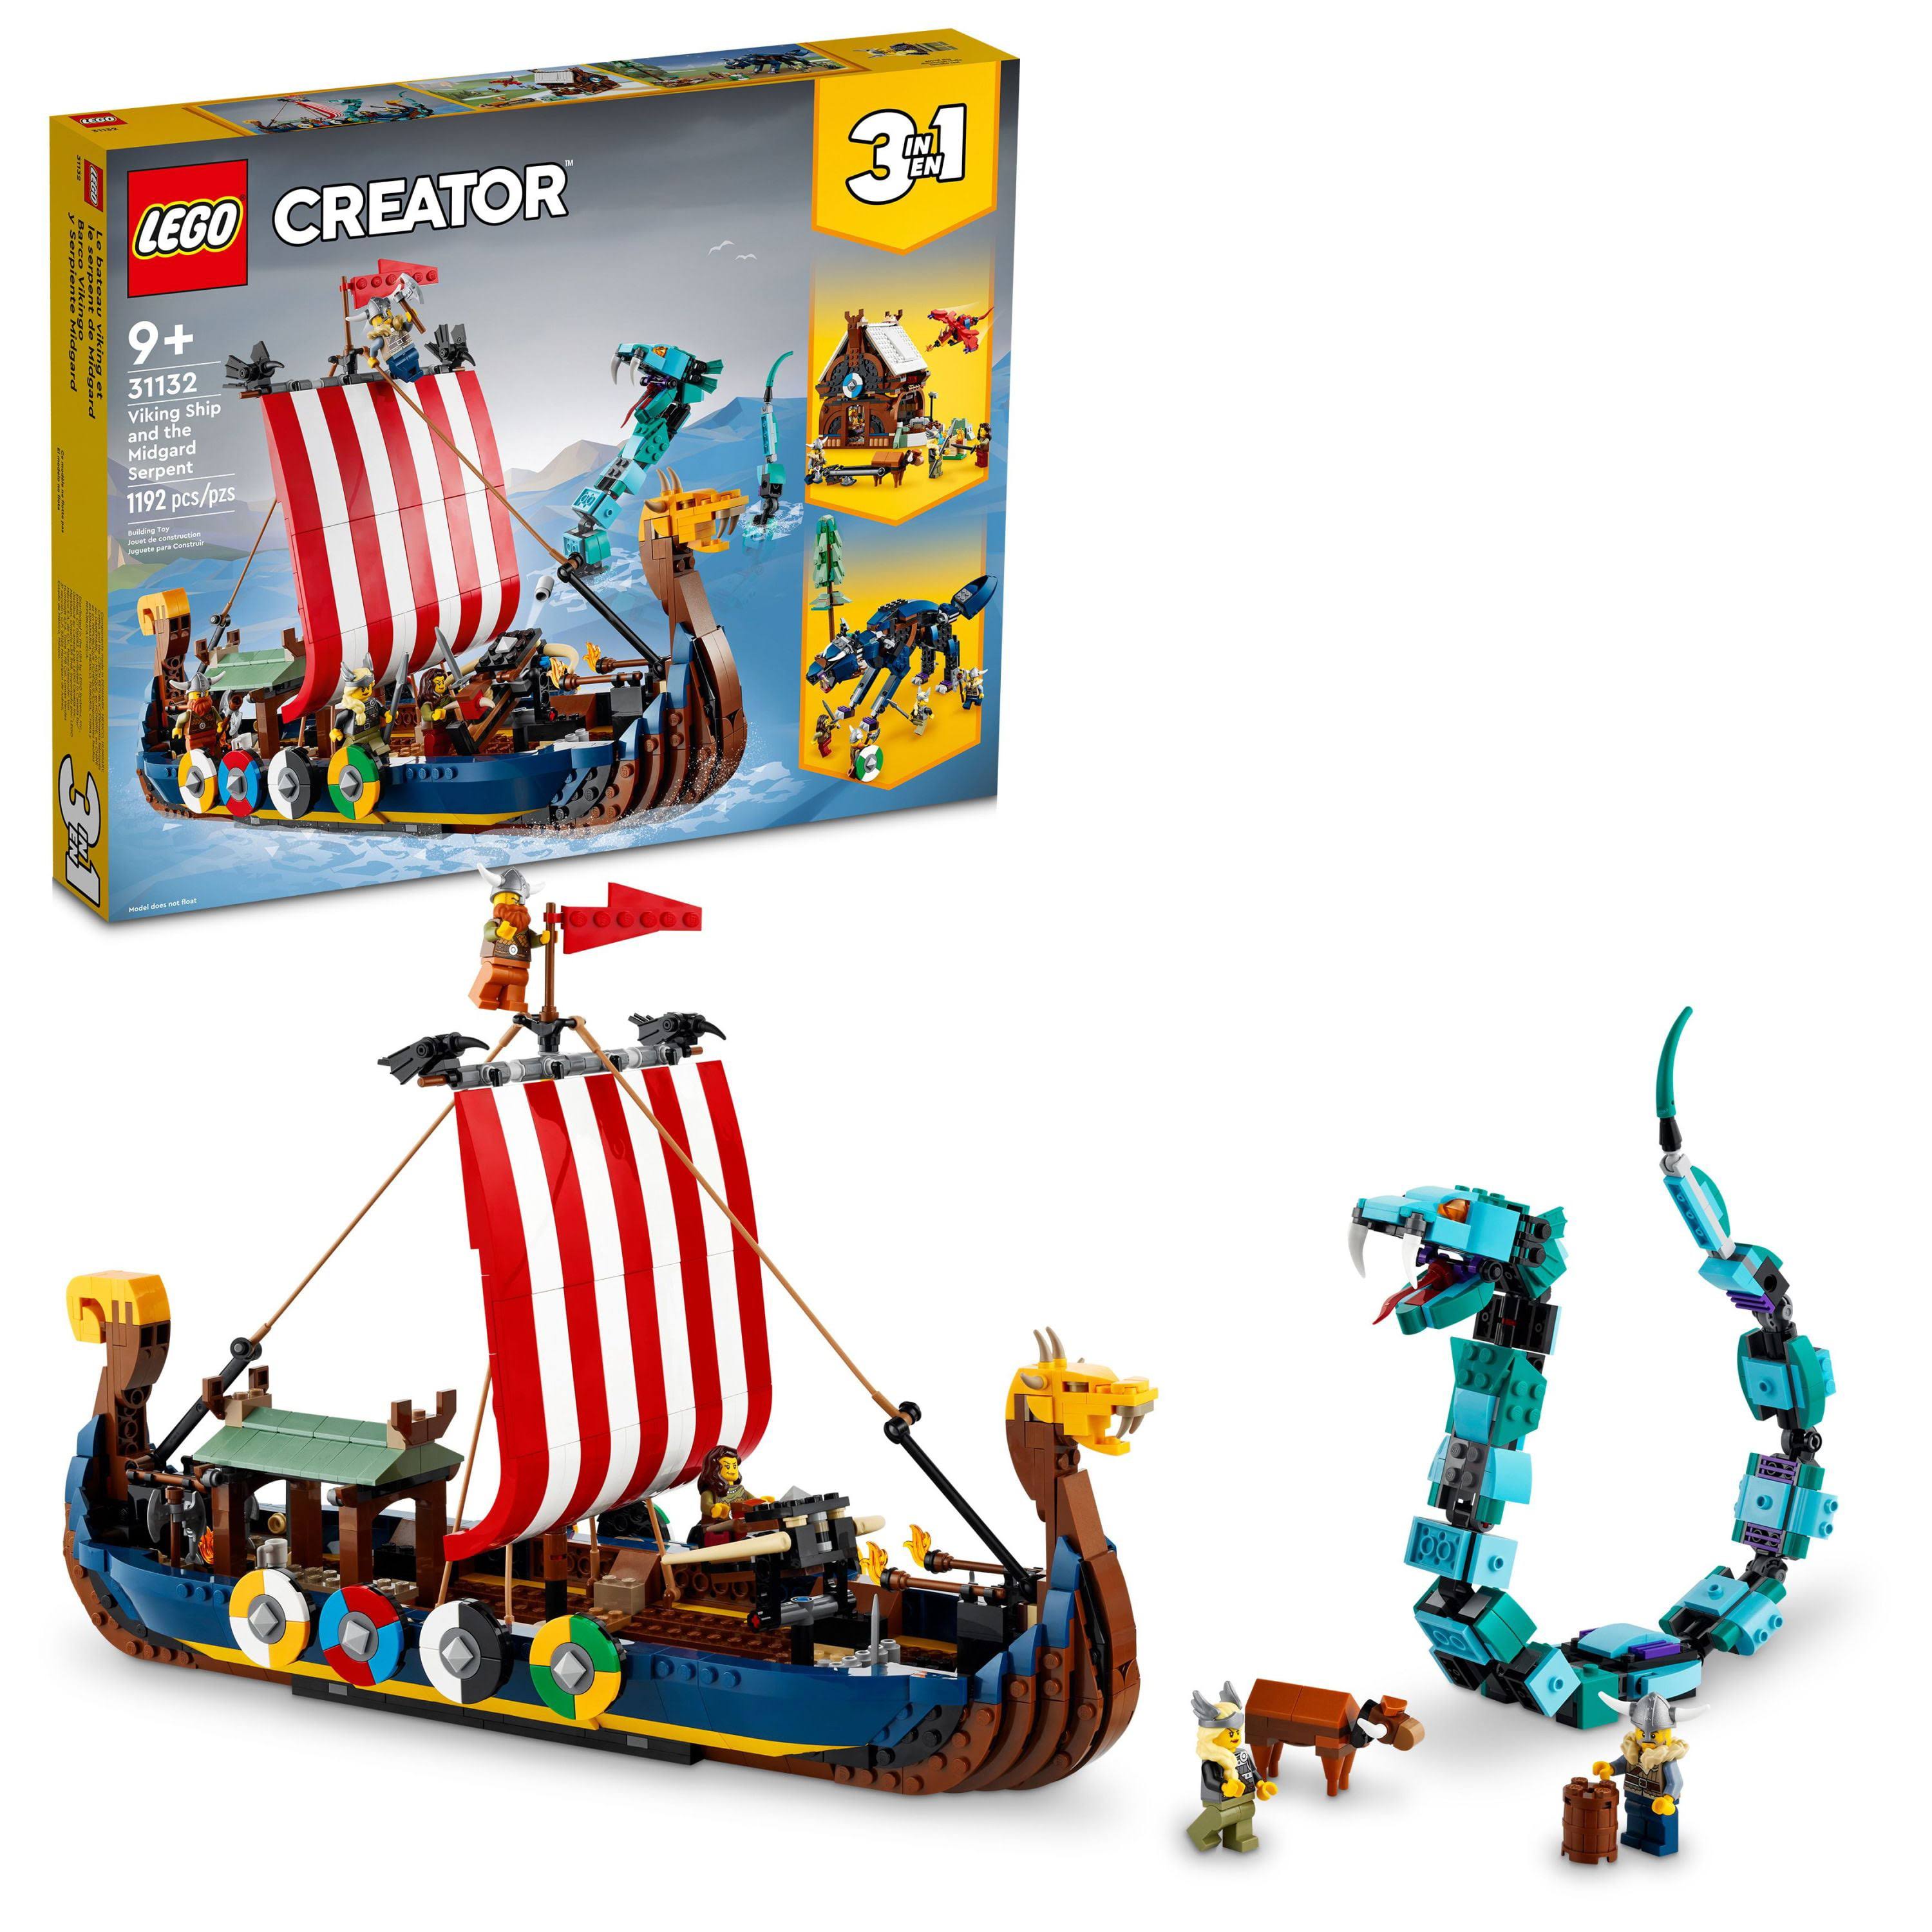 LEGO Creator 3 in 1 Viking Ship and The Midgard Serpent Set 31132